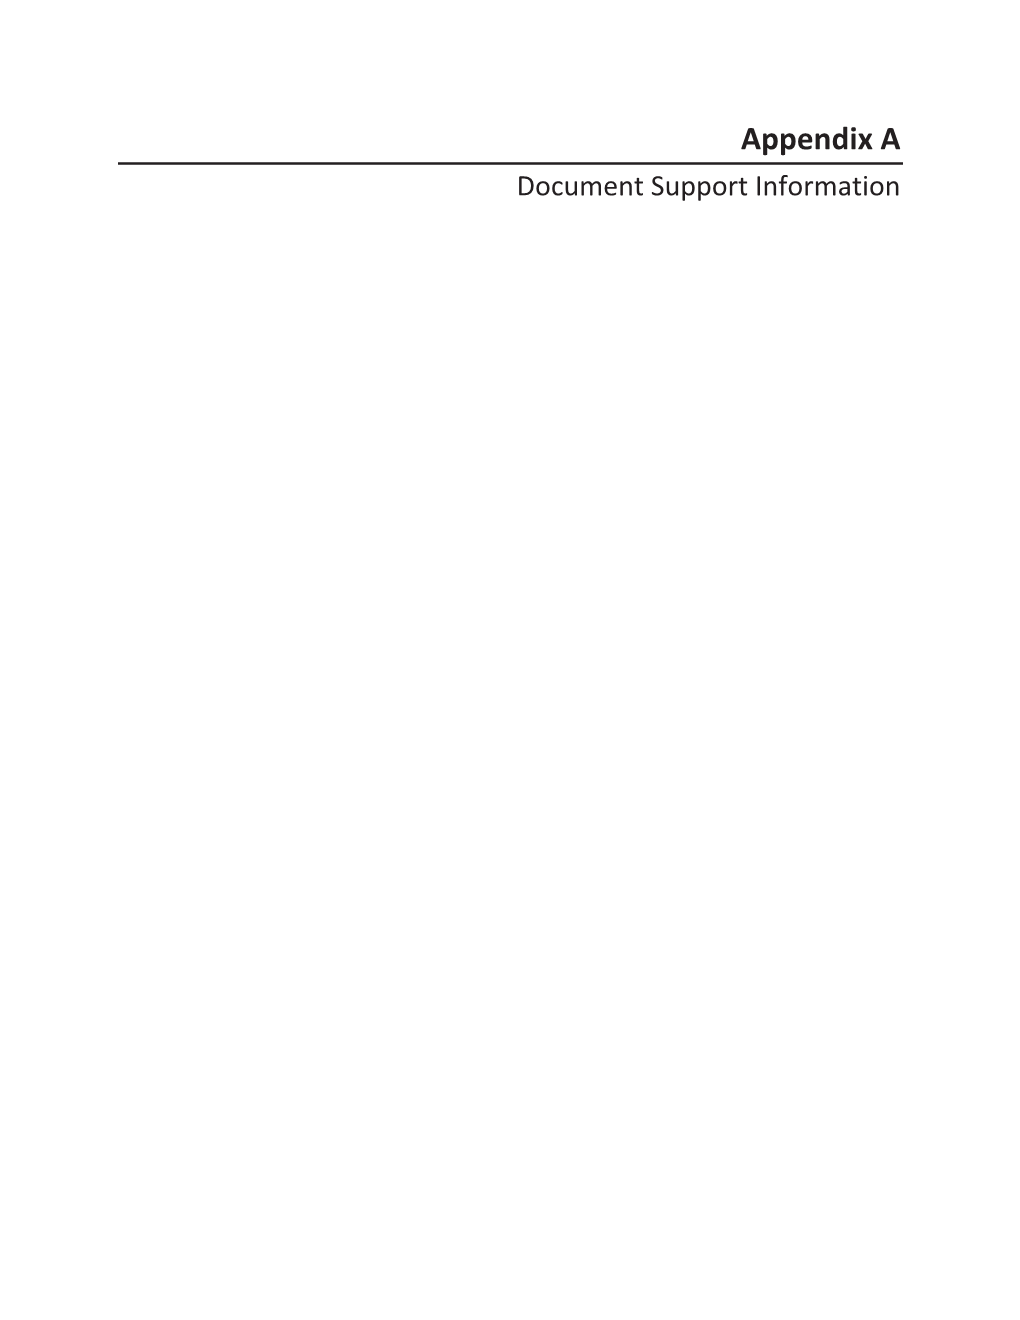 Appendix a Document Support Information